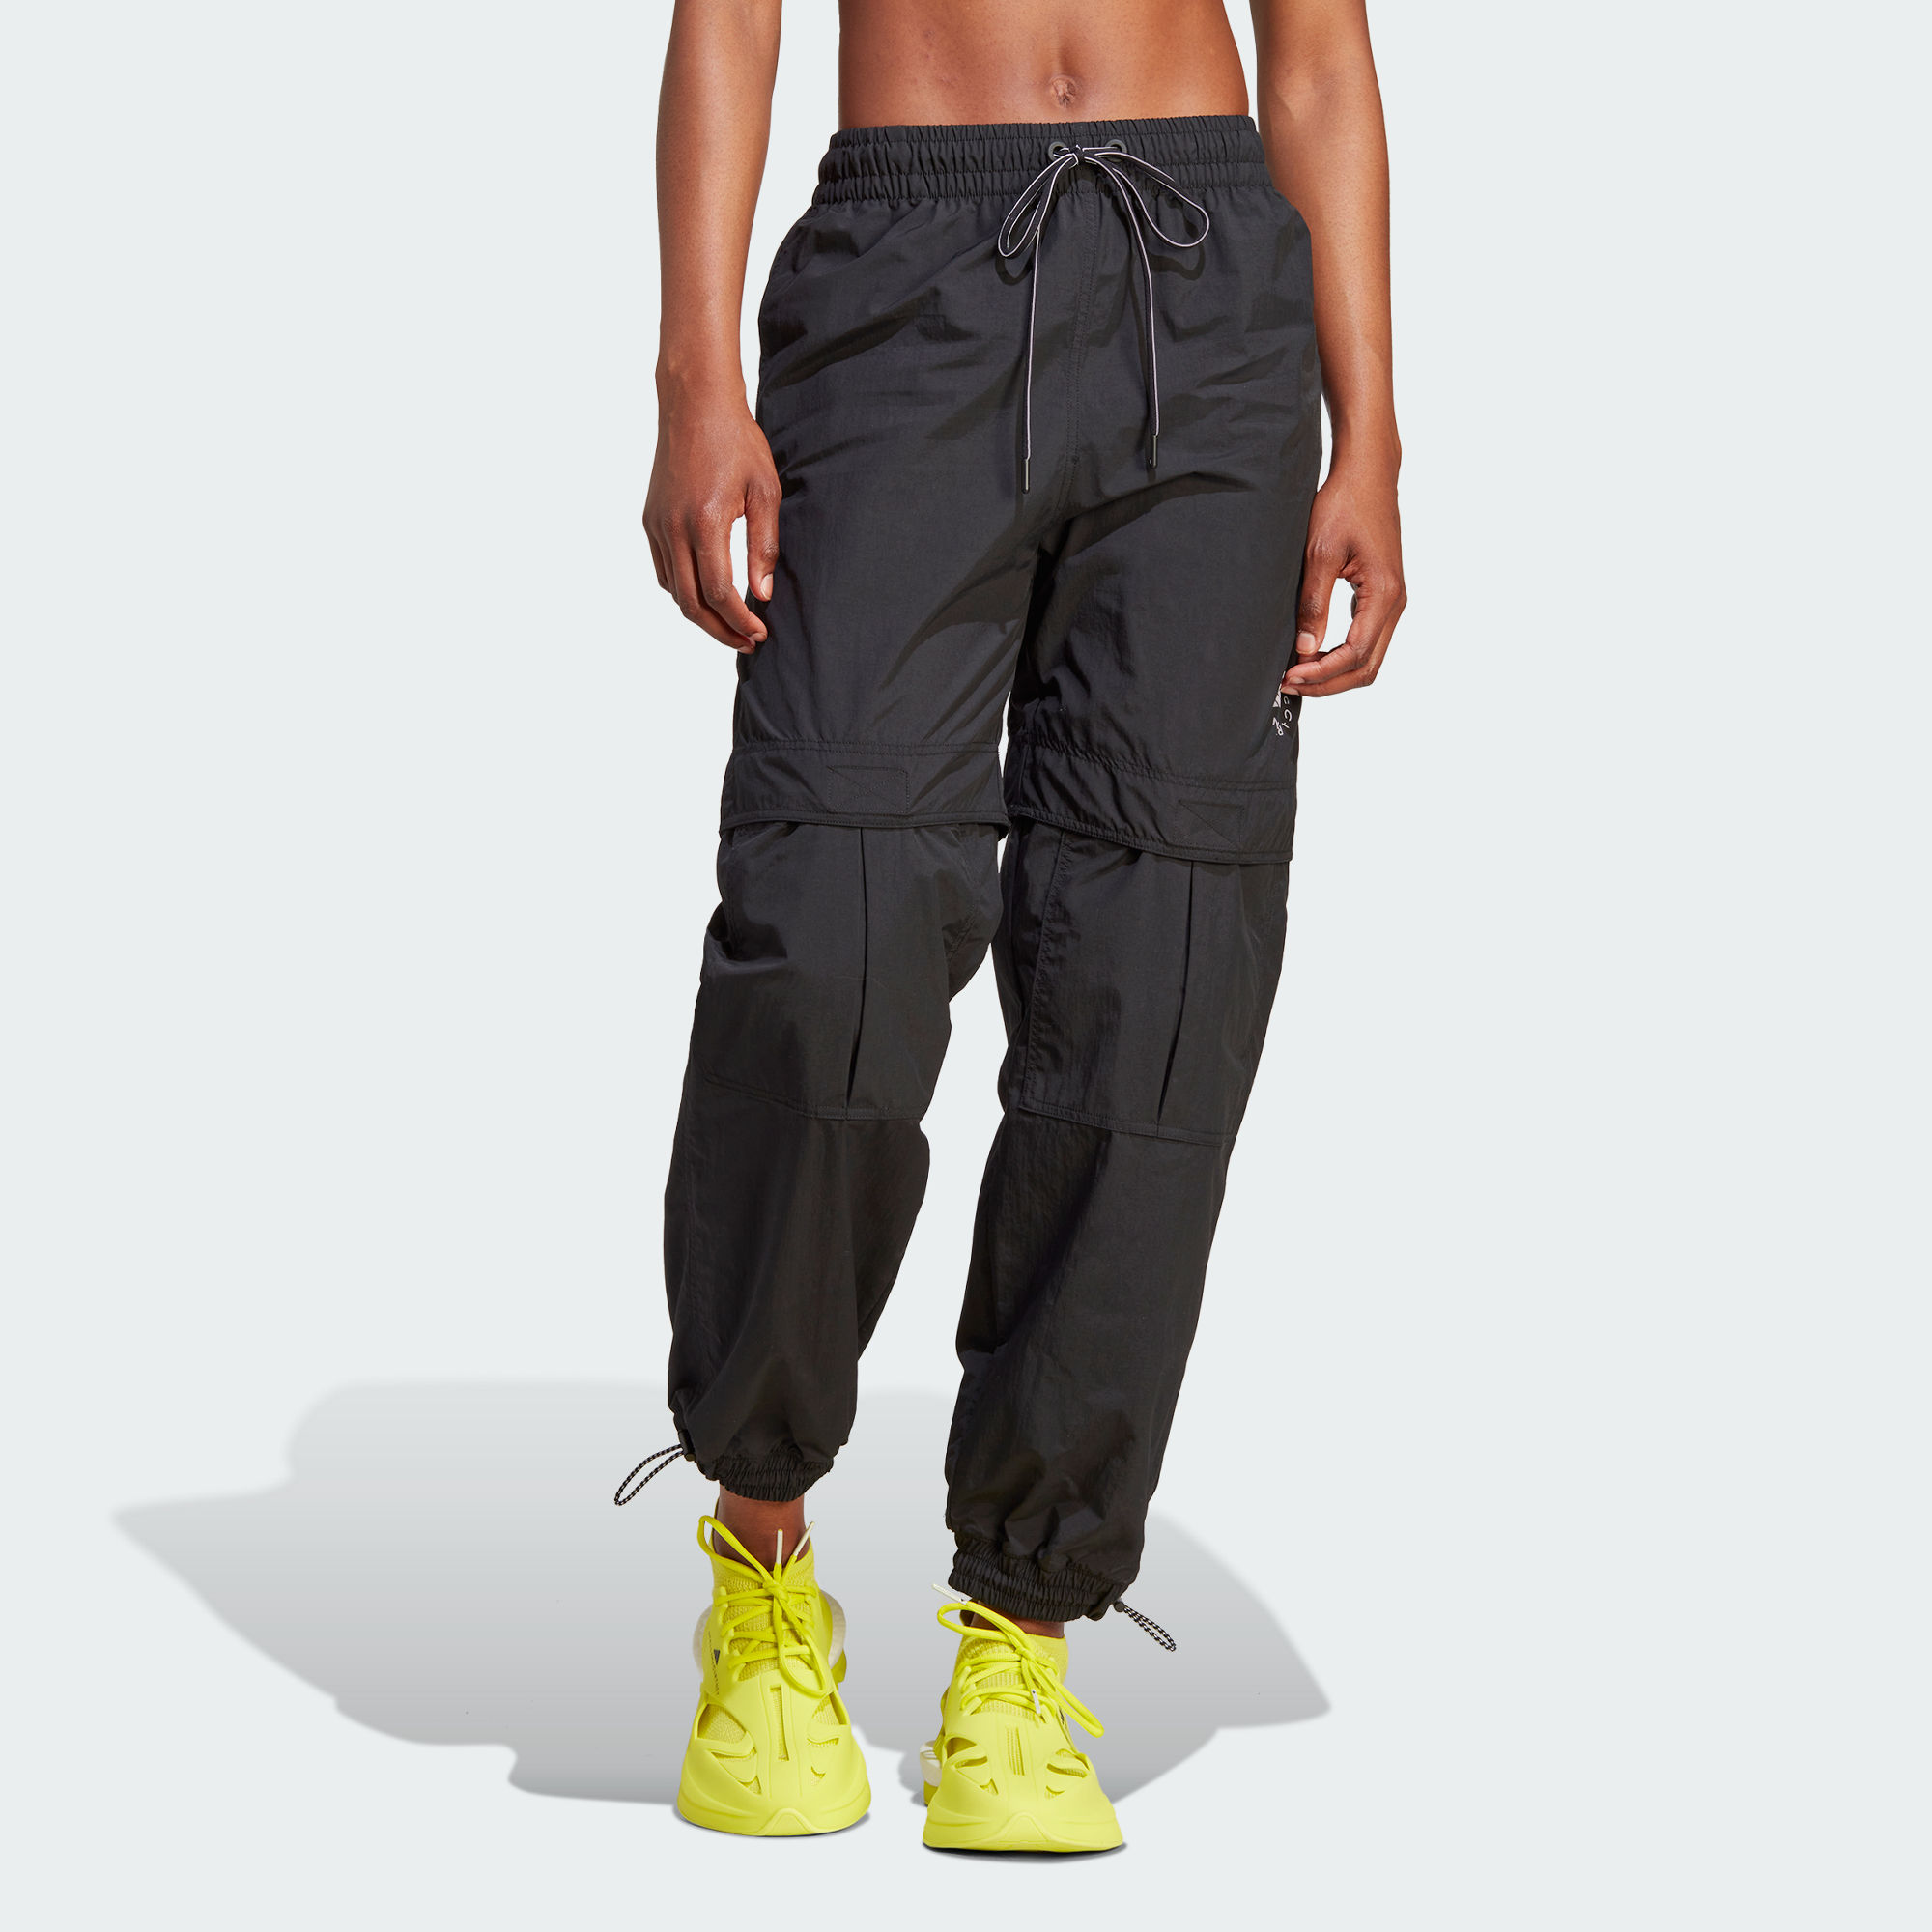 adidas adidas by stella mccartney truecasuals woven solid tracksuit bottoms women black size a/l